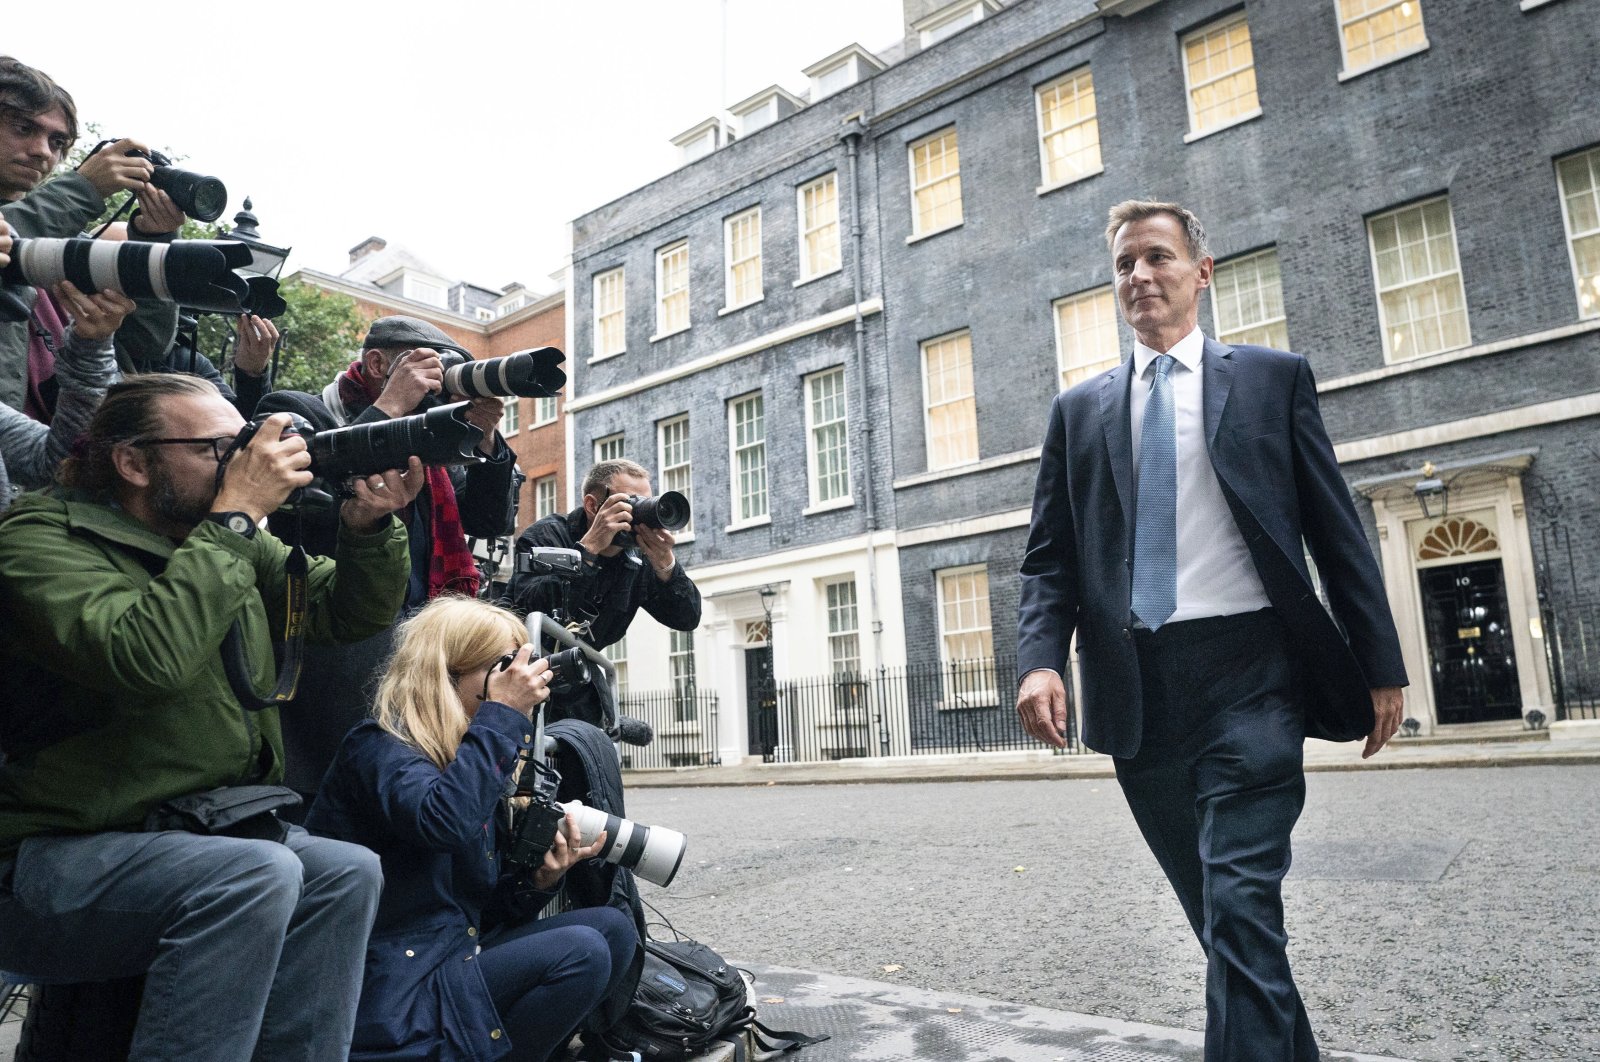 Jeremy Hunt leaves 10 Downing Street after he was appointed Chancellor of the Exchequer following the resignation of Kwasi Kwarteng, London, Britain, Oct. 14, 2022. (AP Photo)